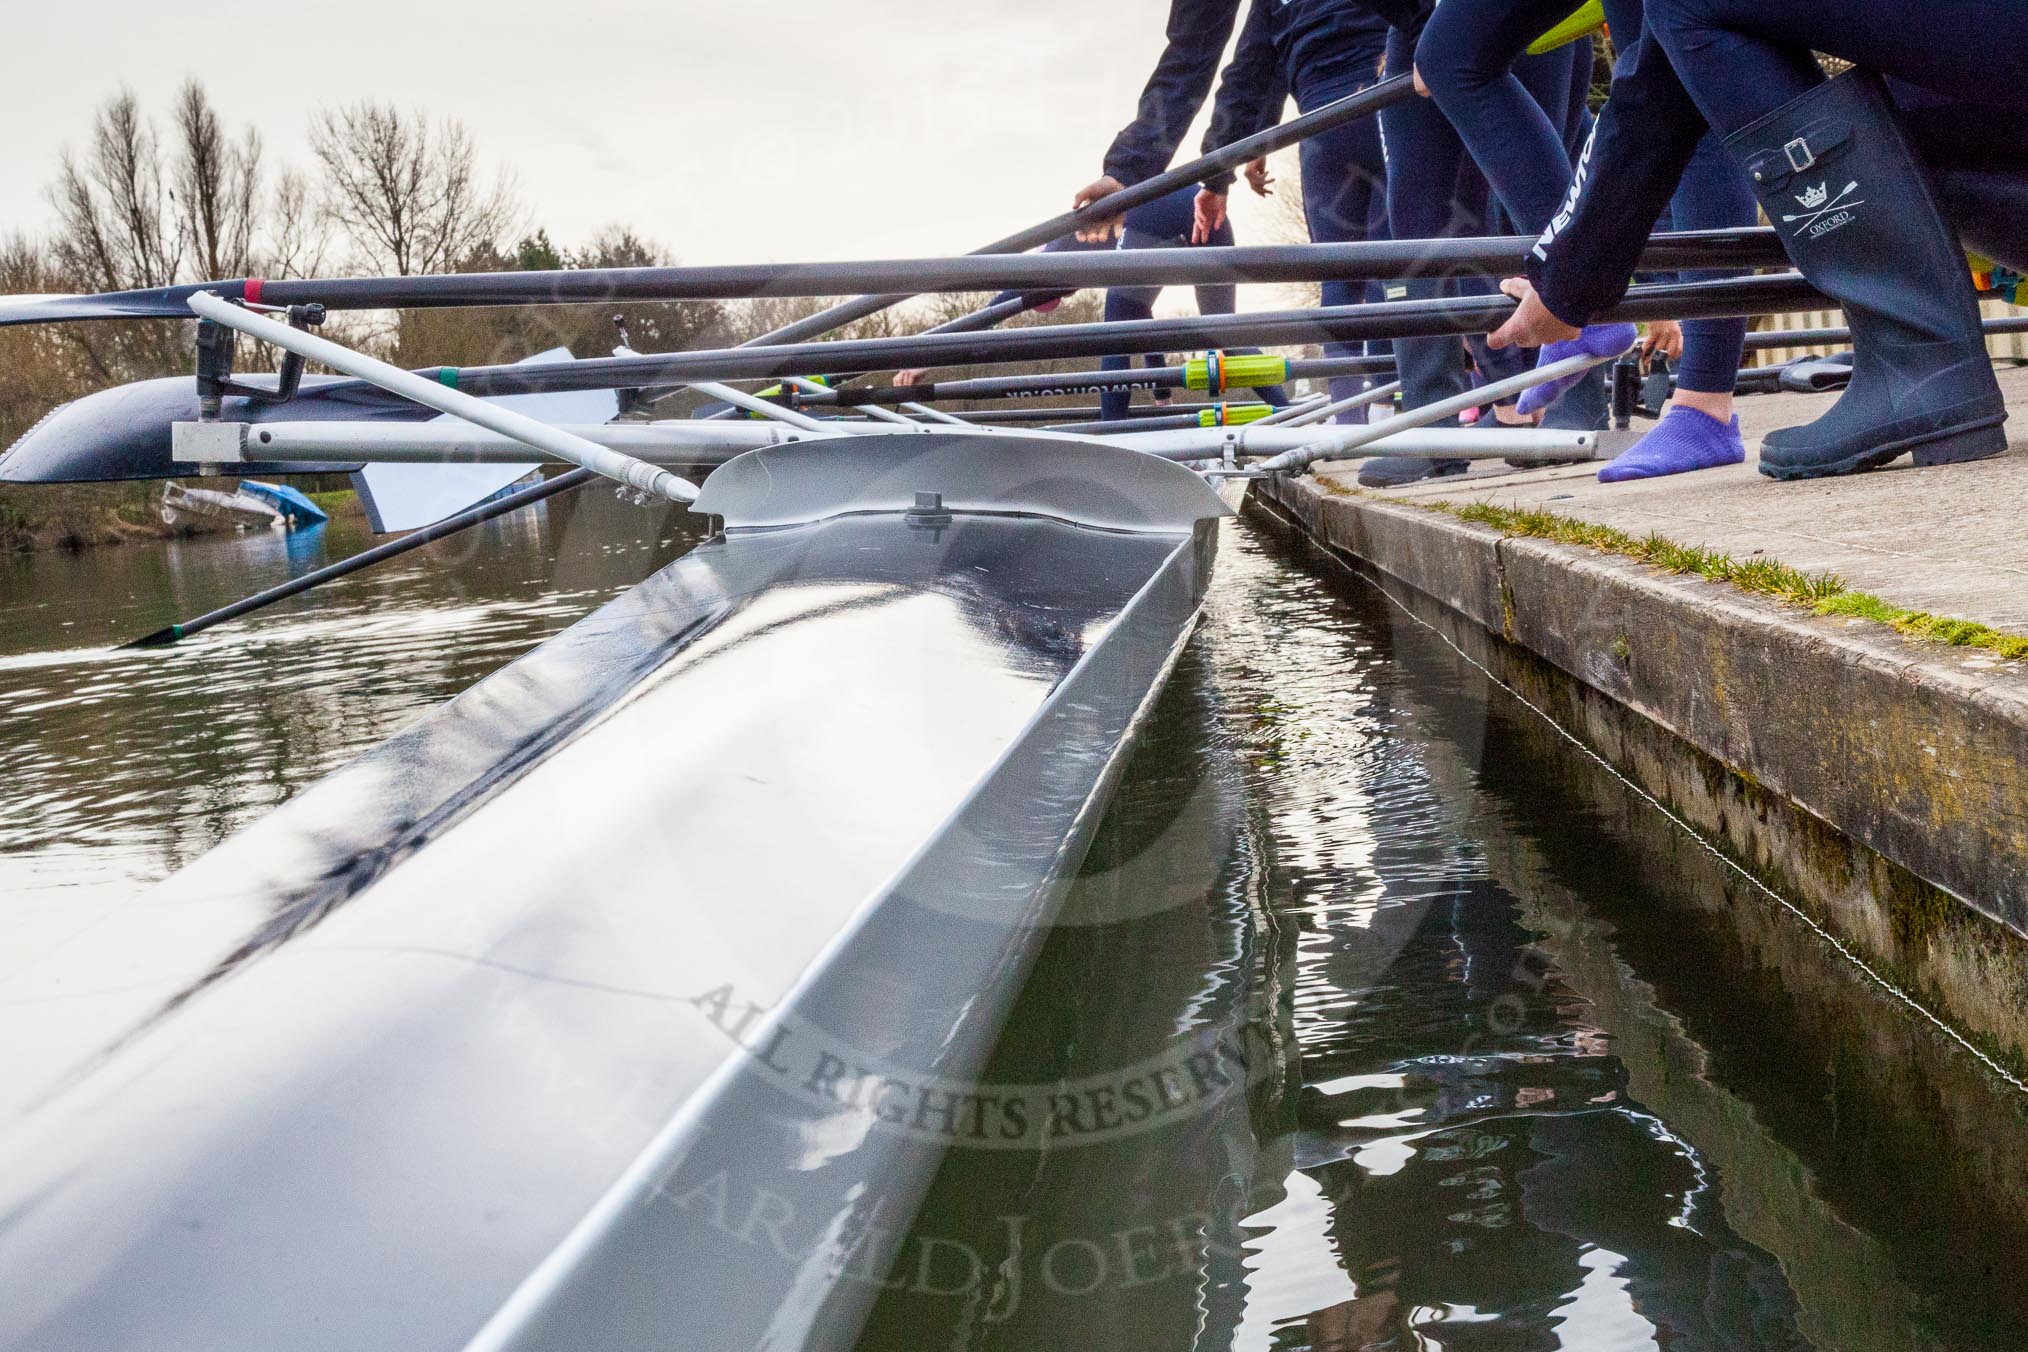 The Boat Race season 2016 - OUWBC training Wallingford: The OUWBC reserve boat crew getting ready for their training session on the Thames at Wallingford.
River Thames,
Wallingford,
Oxfordshire,

on 29 February 2016 at 15:17, image #35